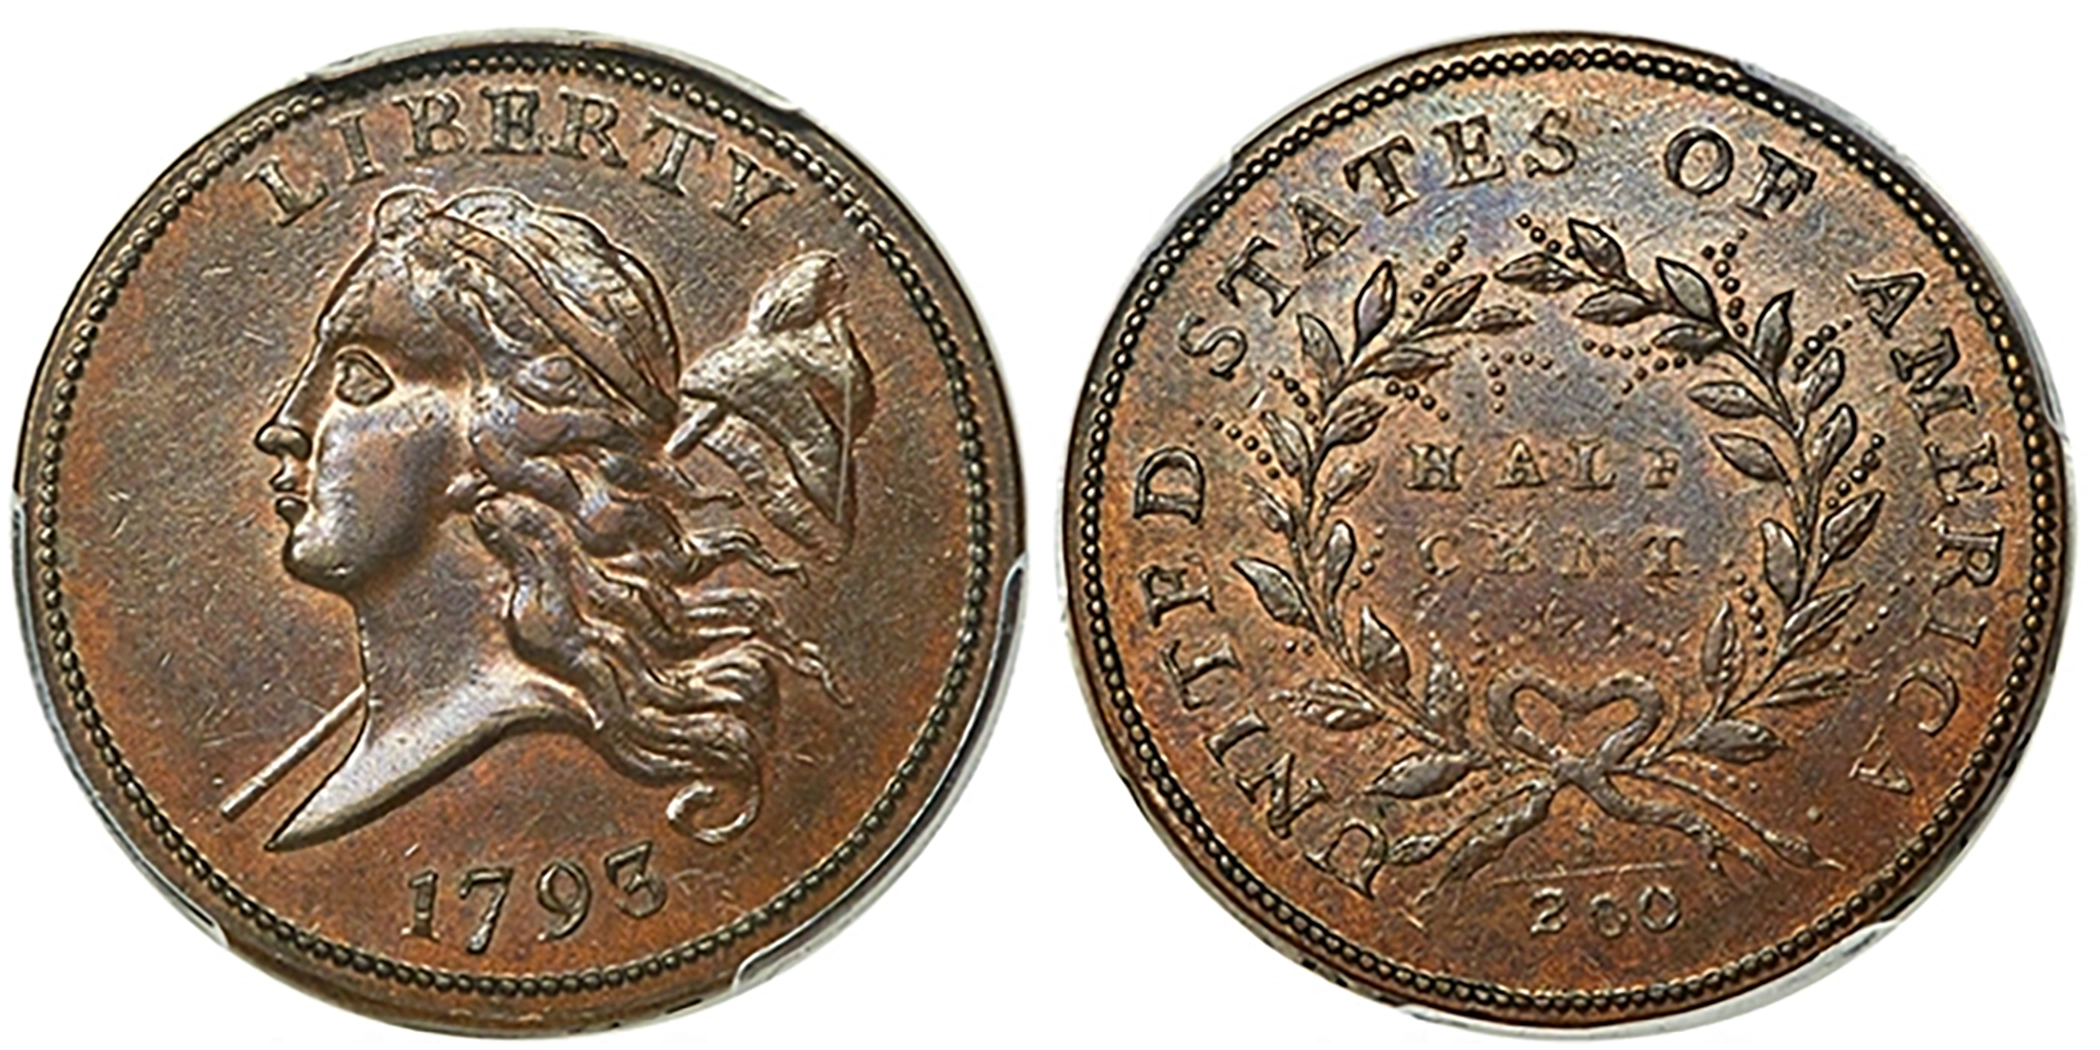 PCGS Coin of the Week: 1943 Bronze Cent, MS62BN